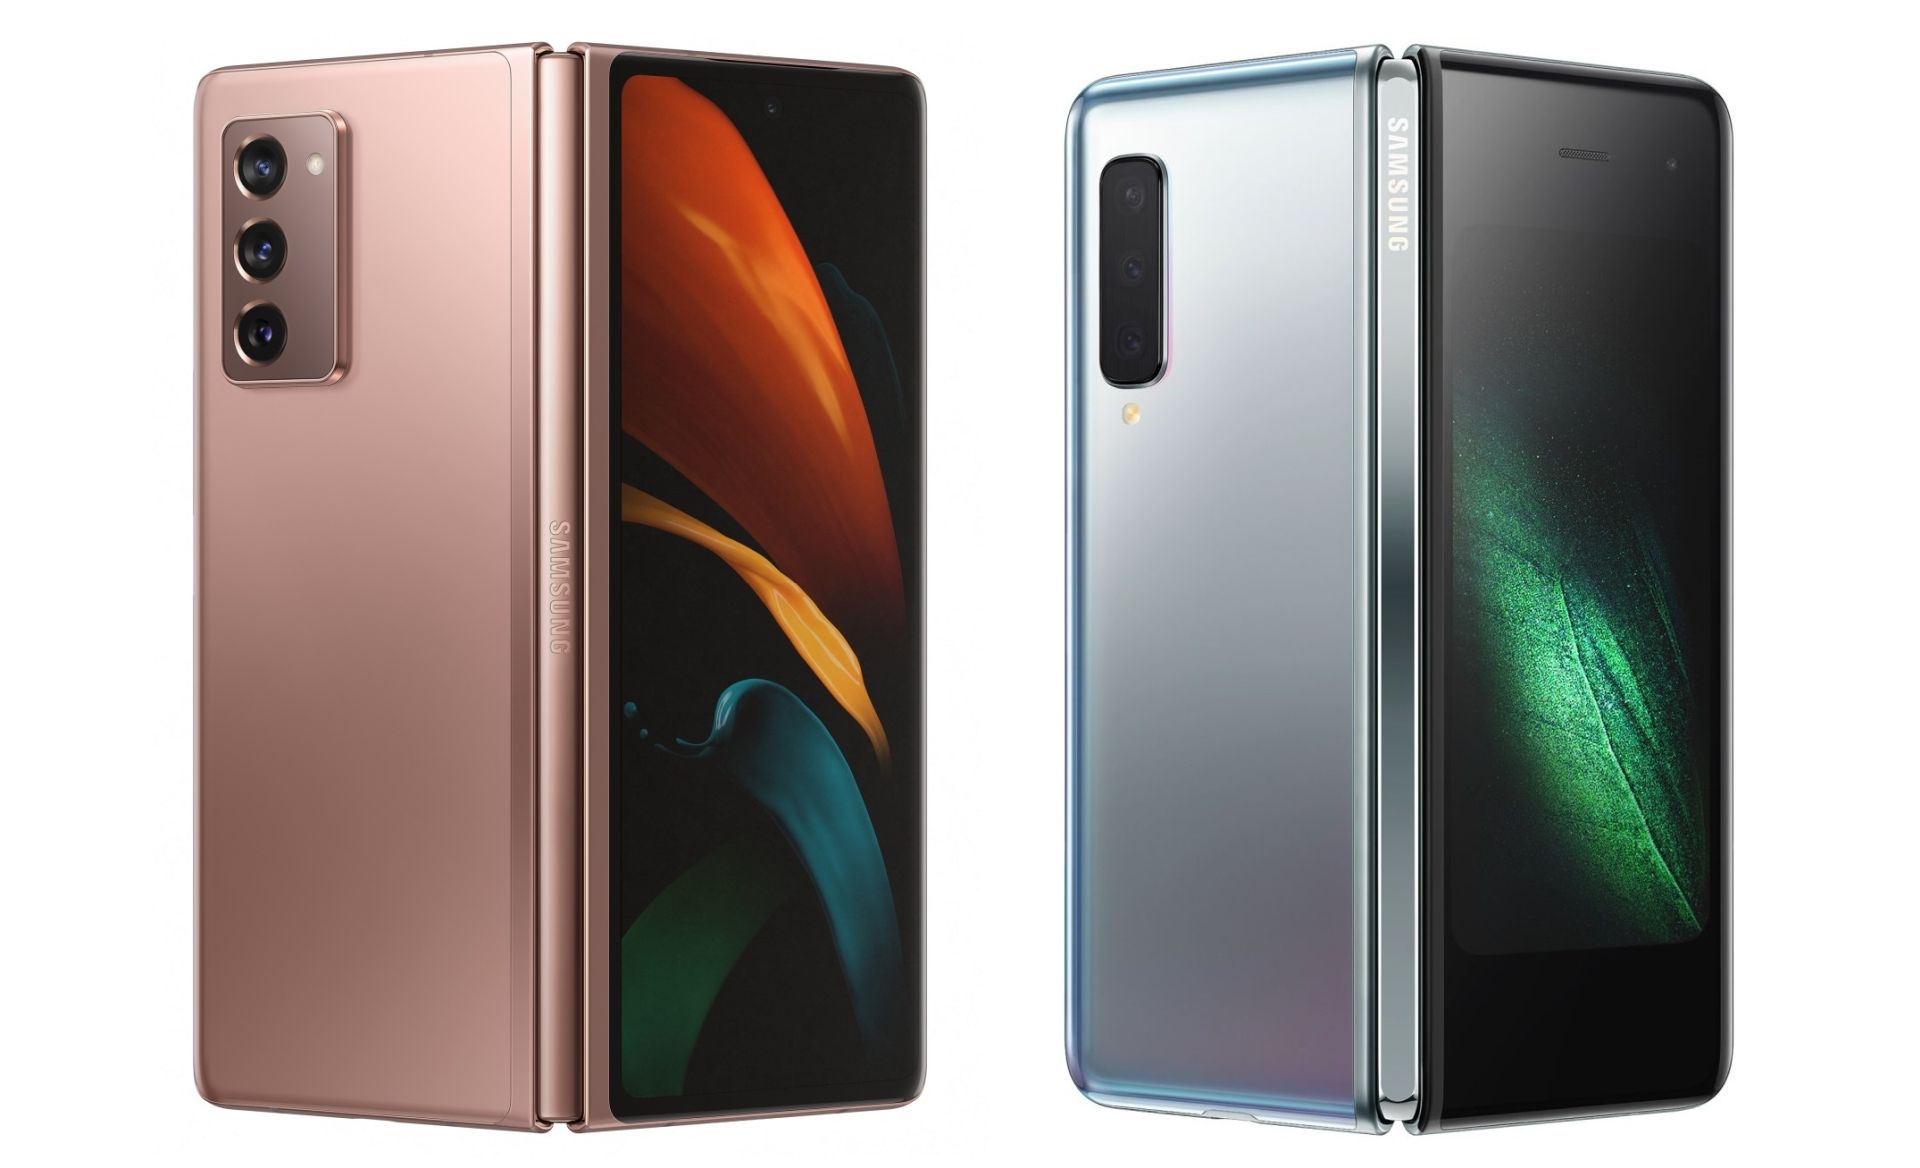 Why the Galaxy Z Fold 2 will be the ultimate smartphone for 